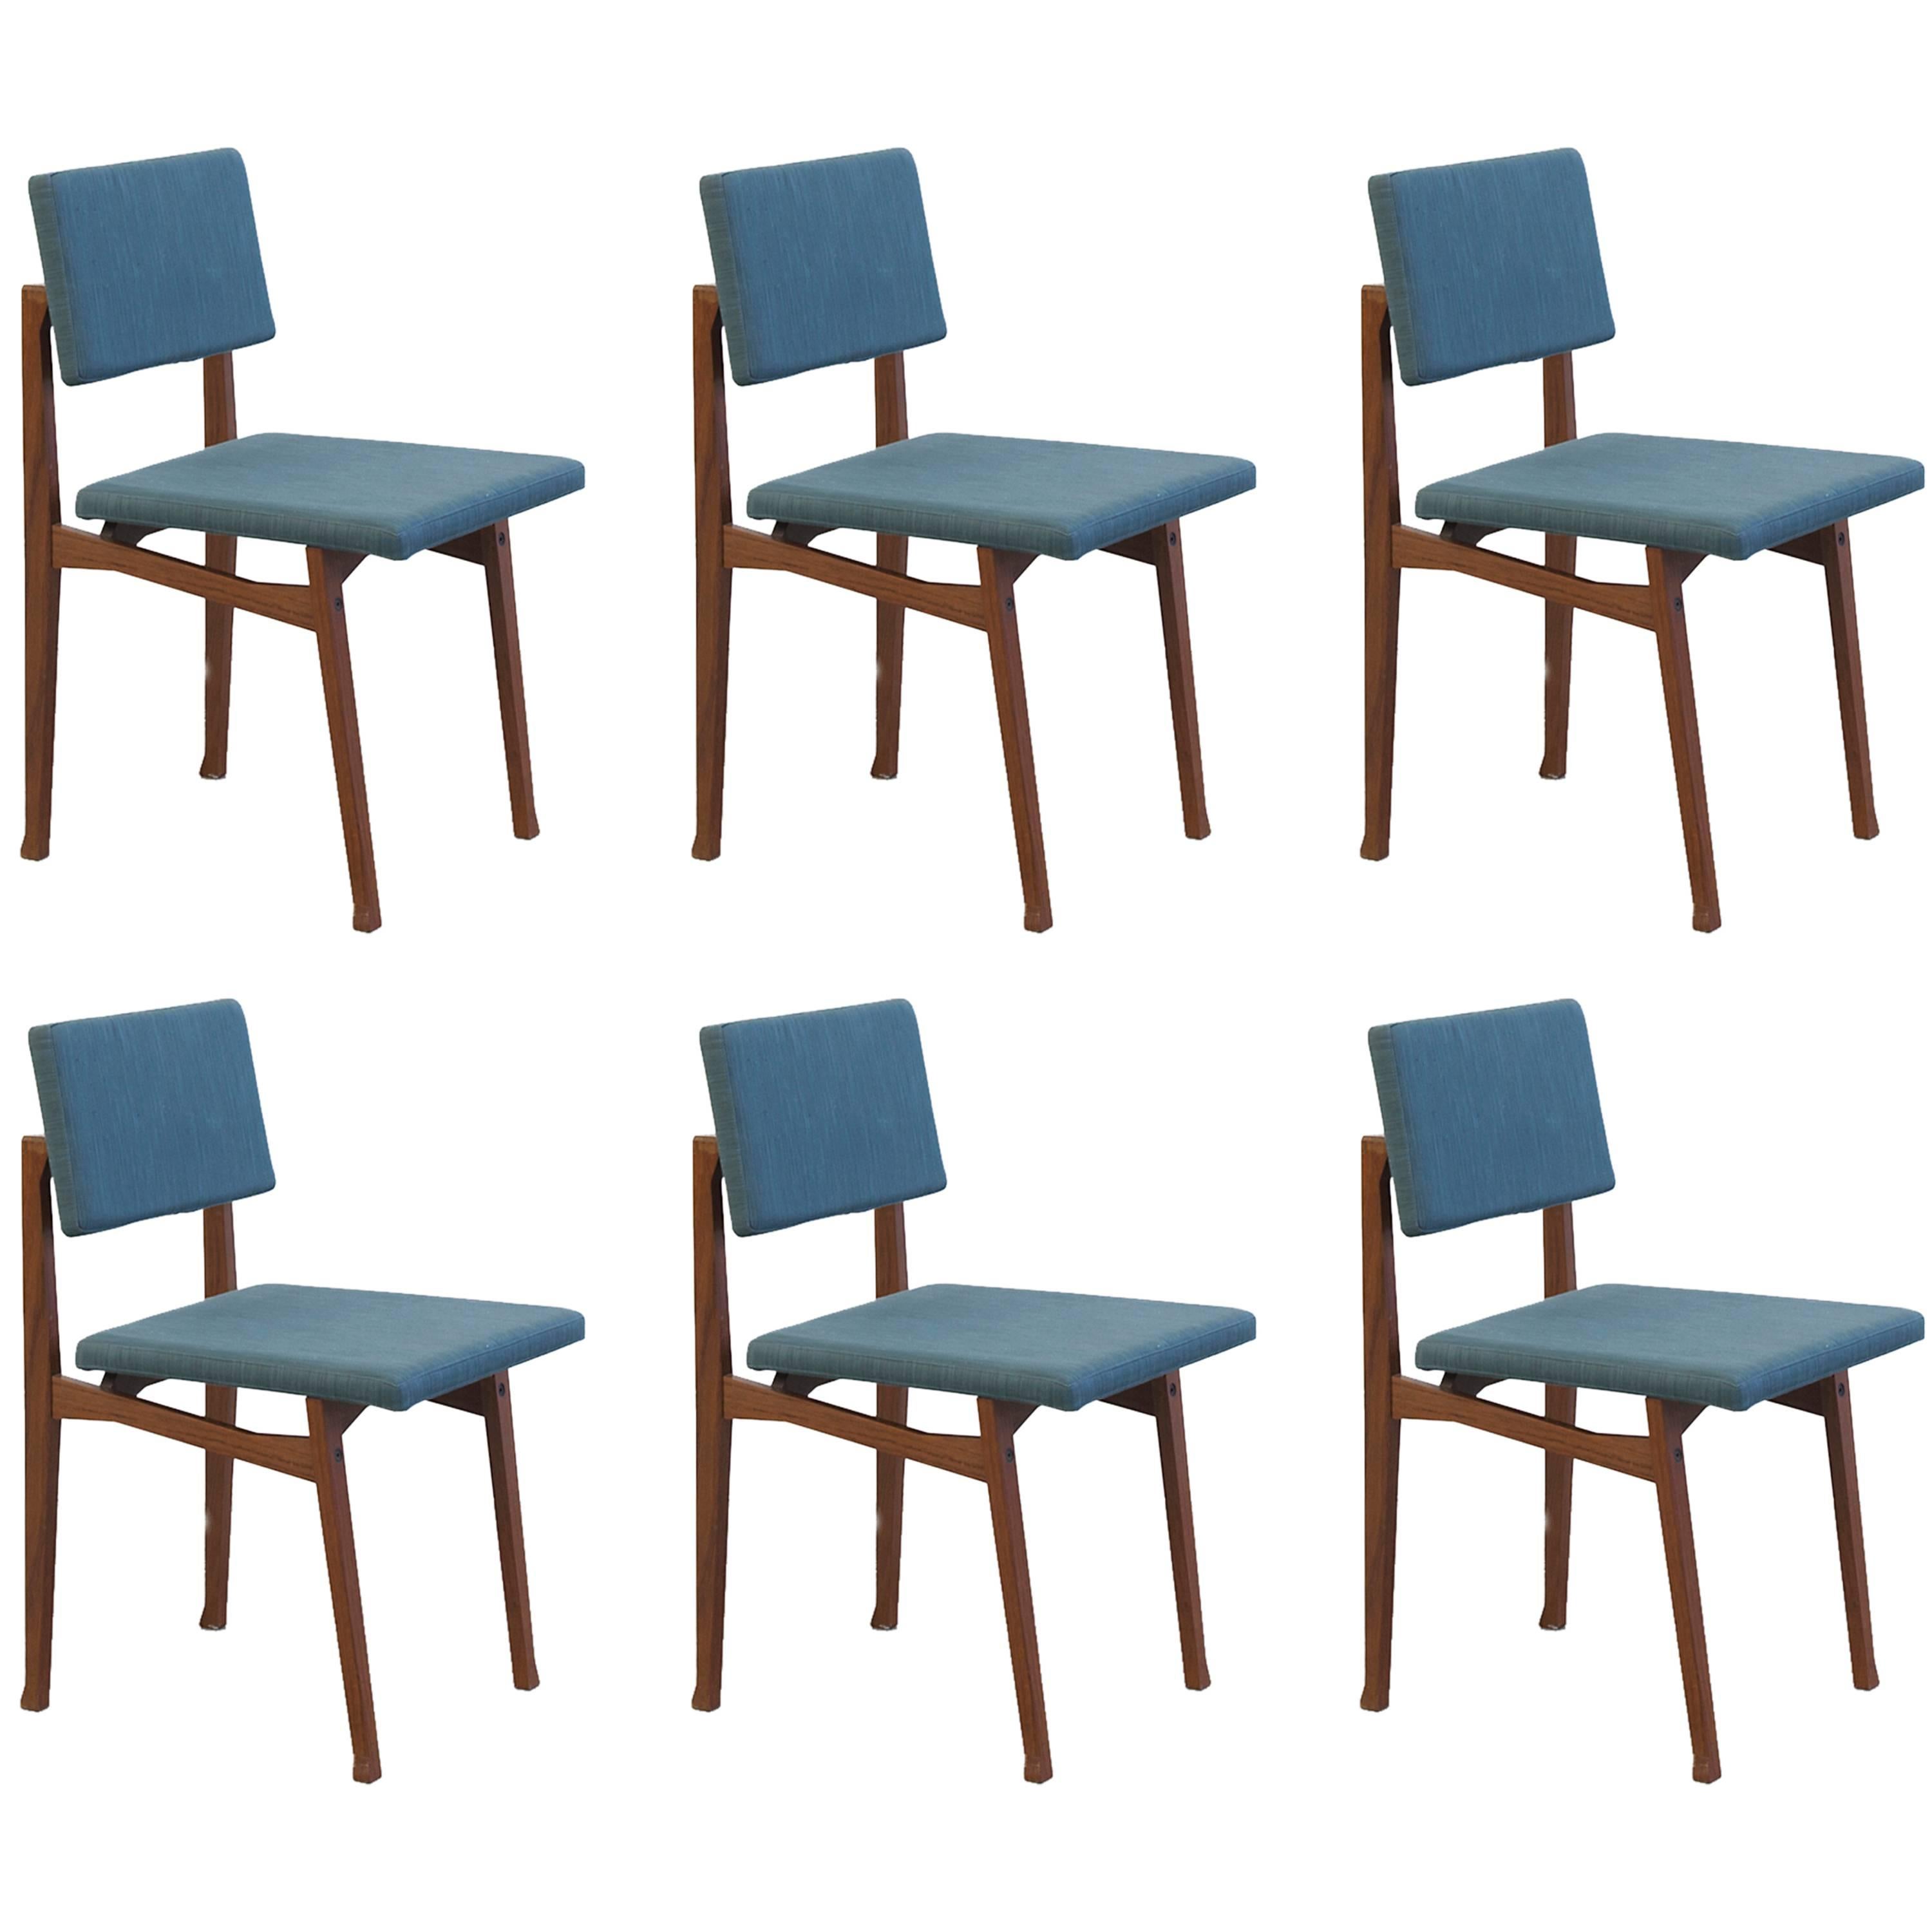 Set of Six 'Luisella' Chairs by Franco Albini